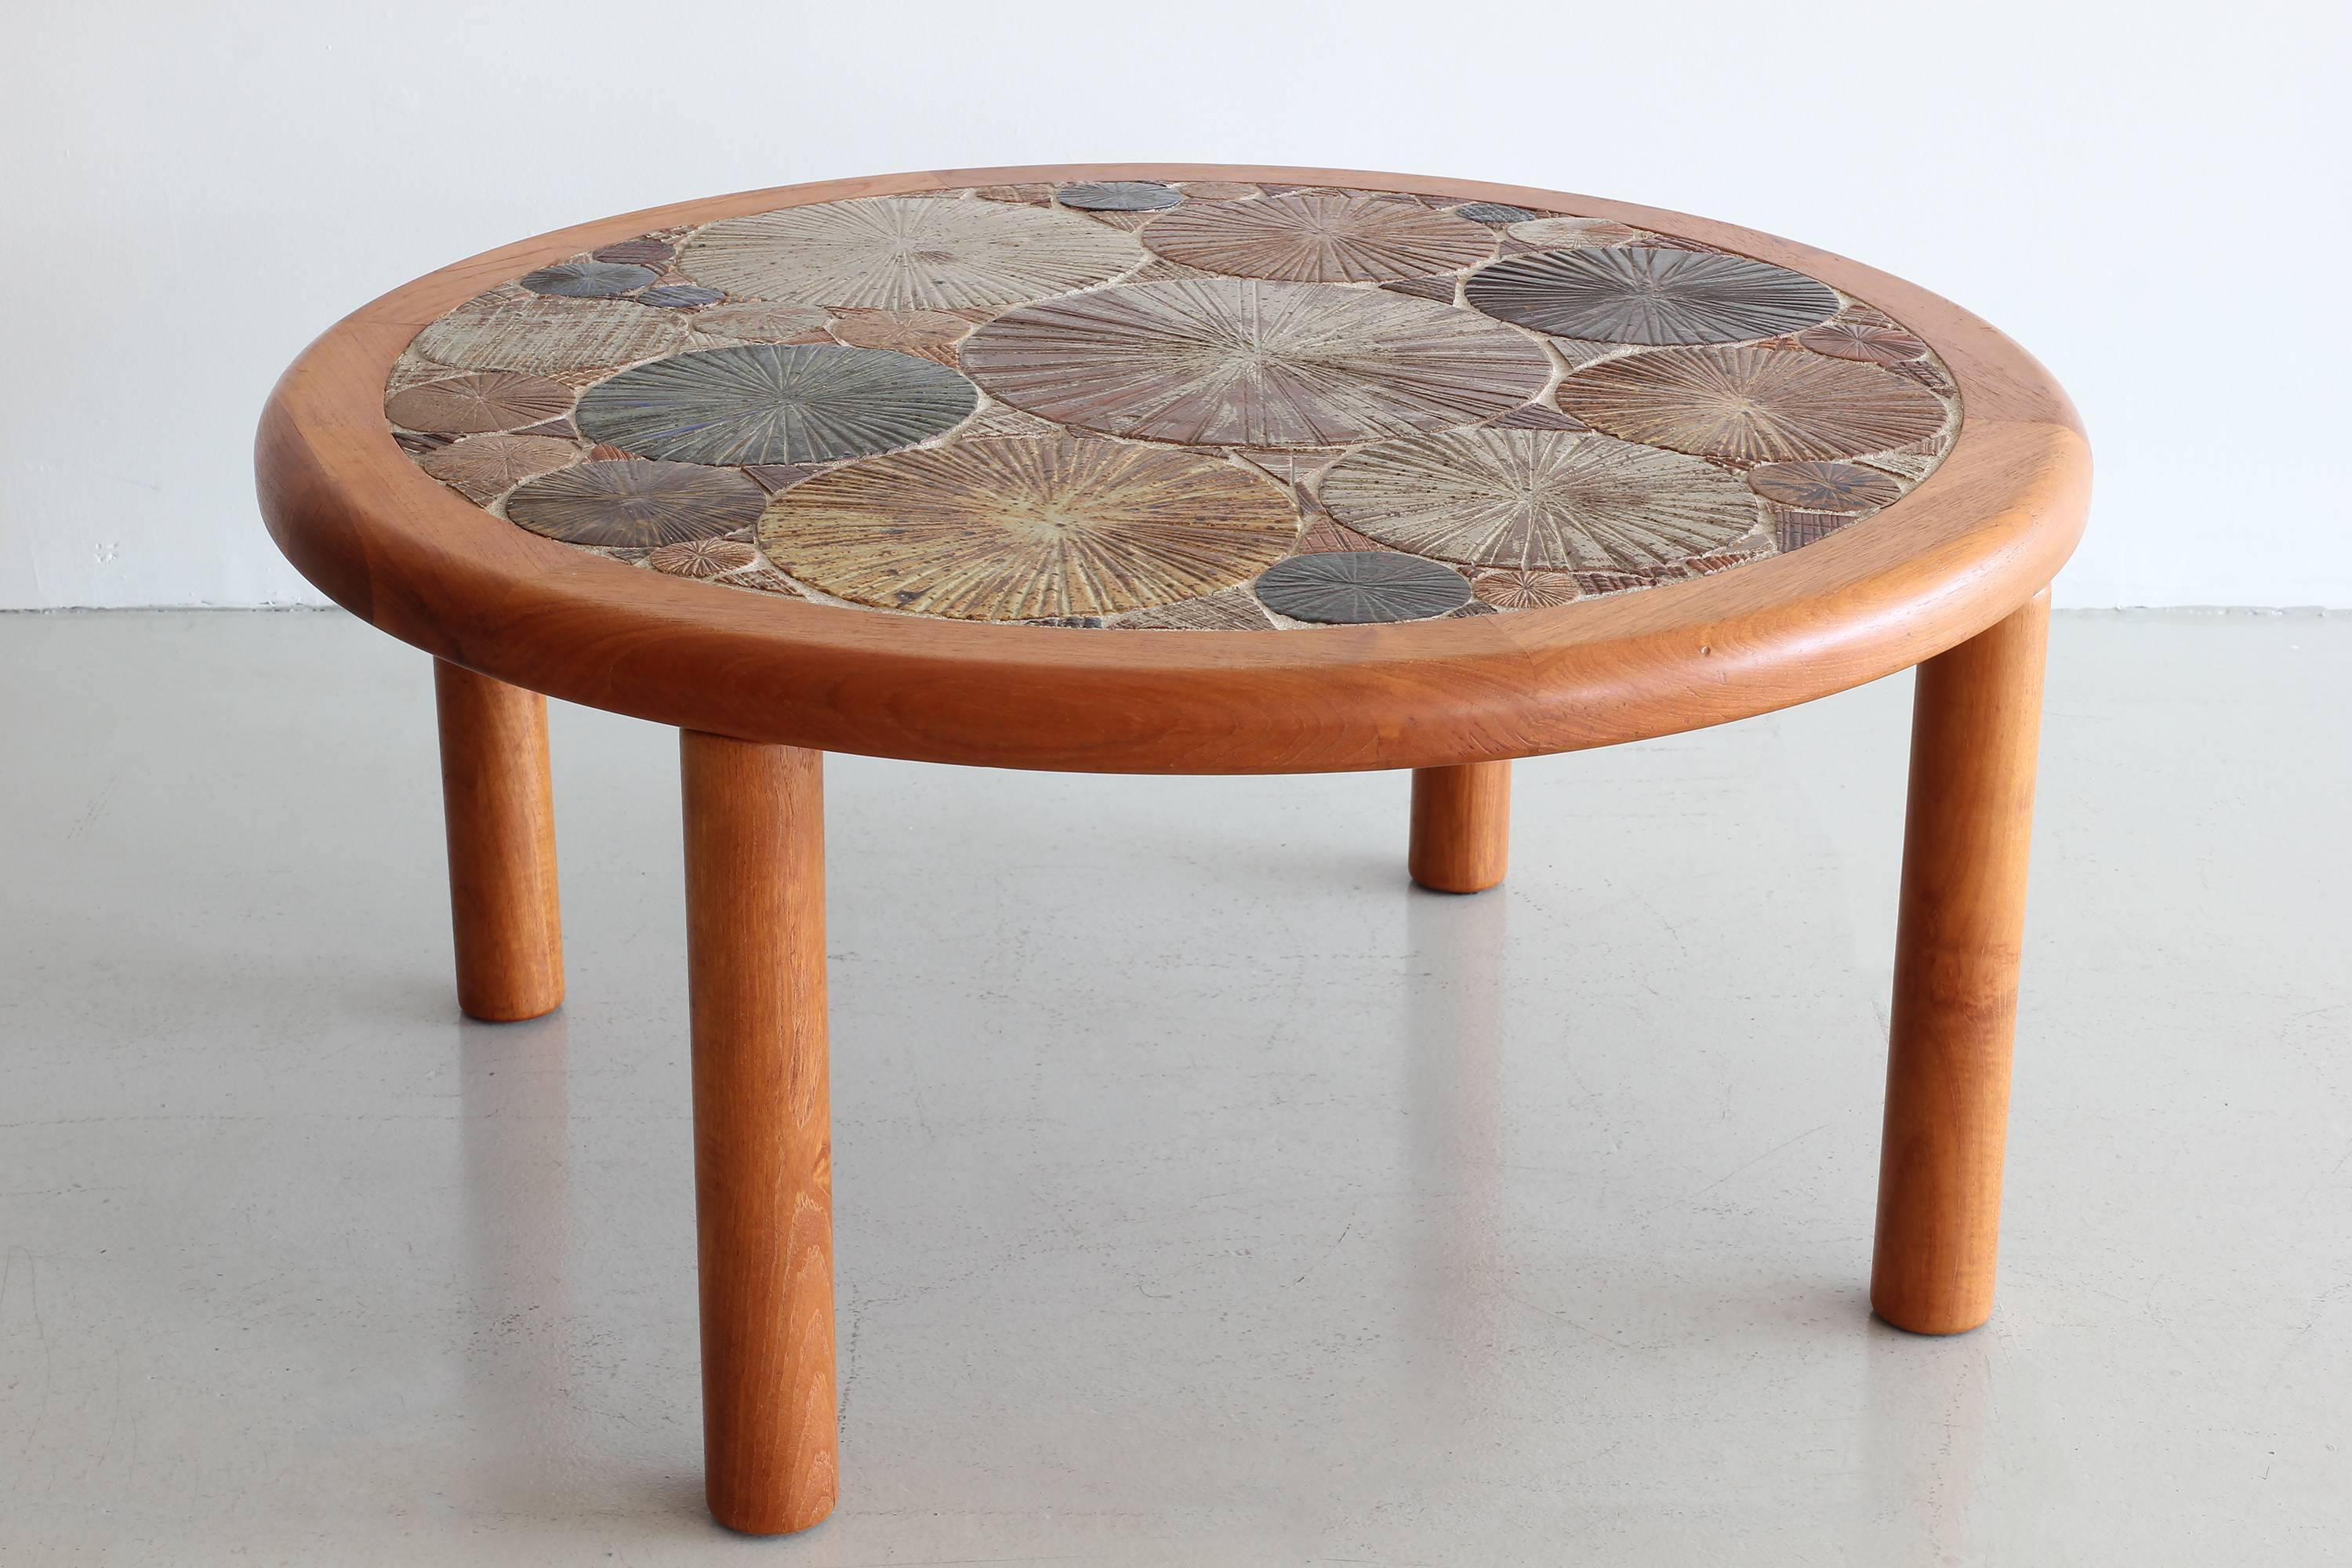 Gorgeous ceramic tile coffee table by Tue Poulsen for Haslev Danish Modern. 

Wonderful color and texture to the tile work and table is hand signed. 

Rare to find in USA. 

Oak legs and edge have been professionally restored to original